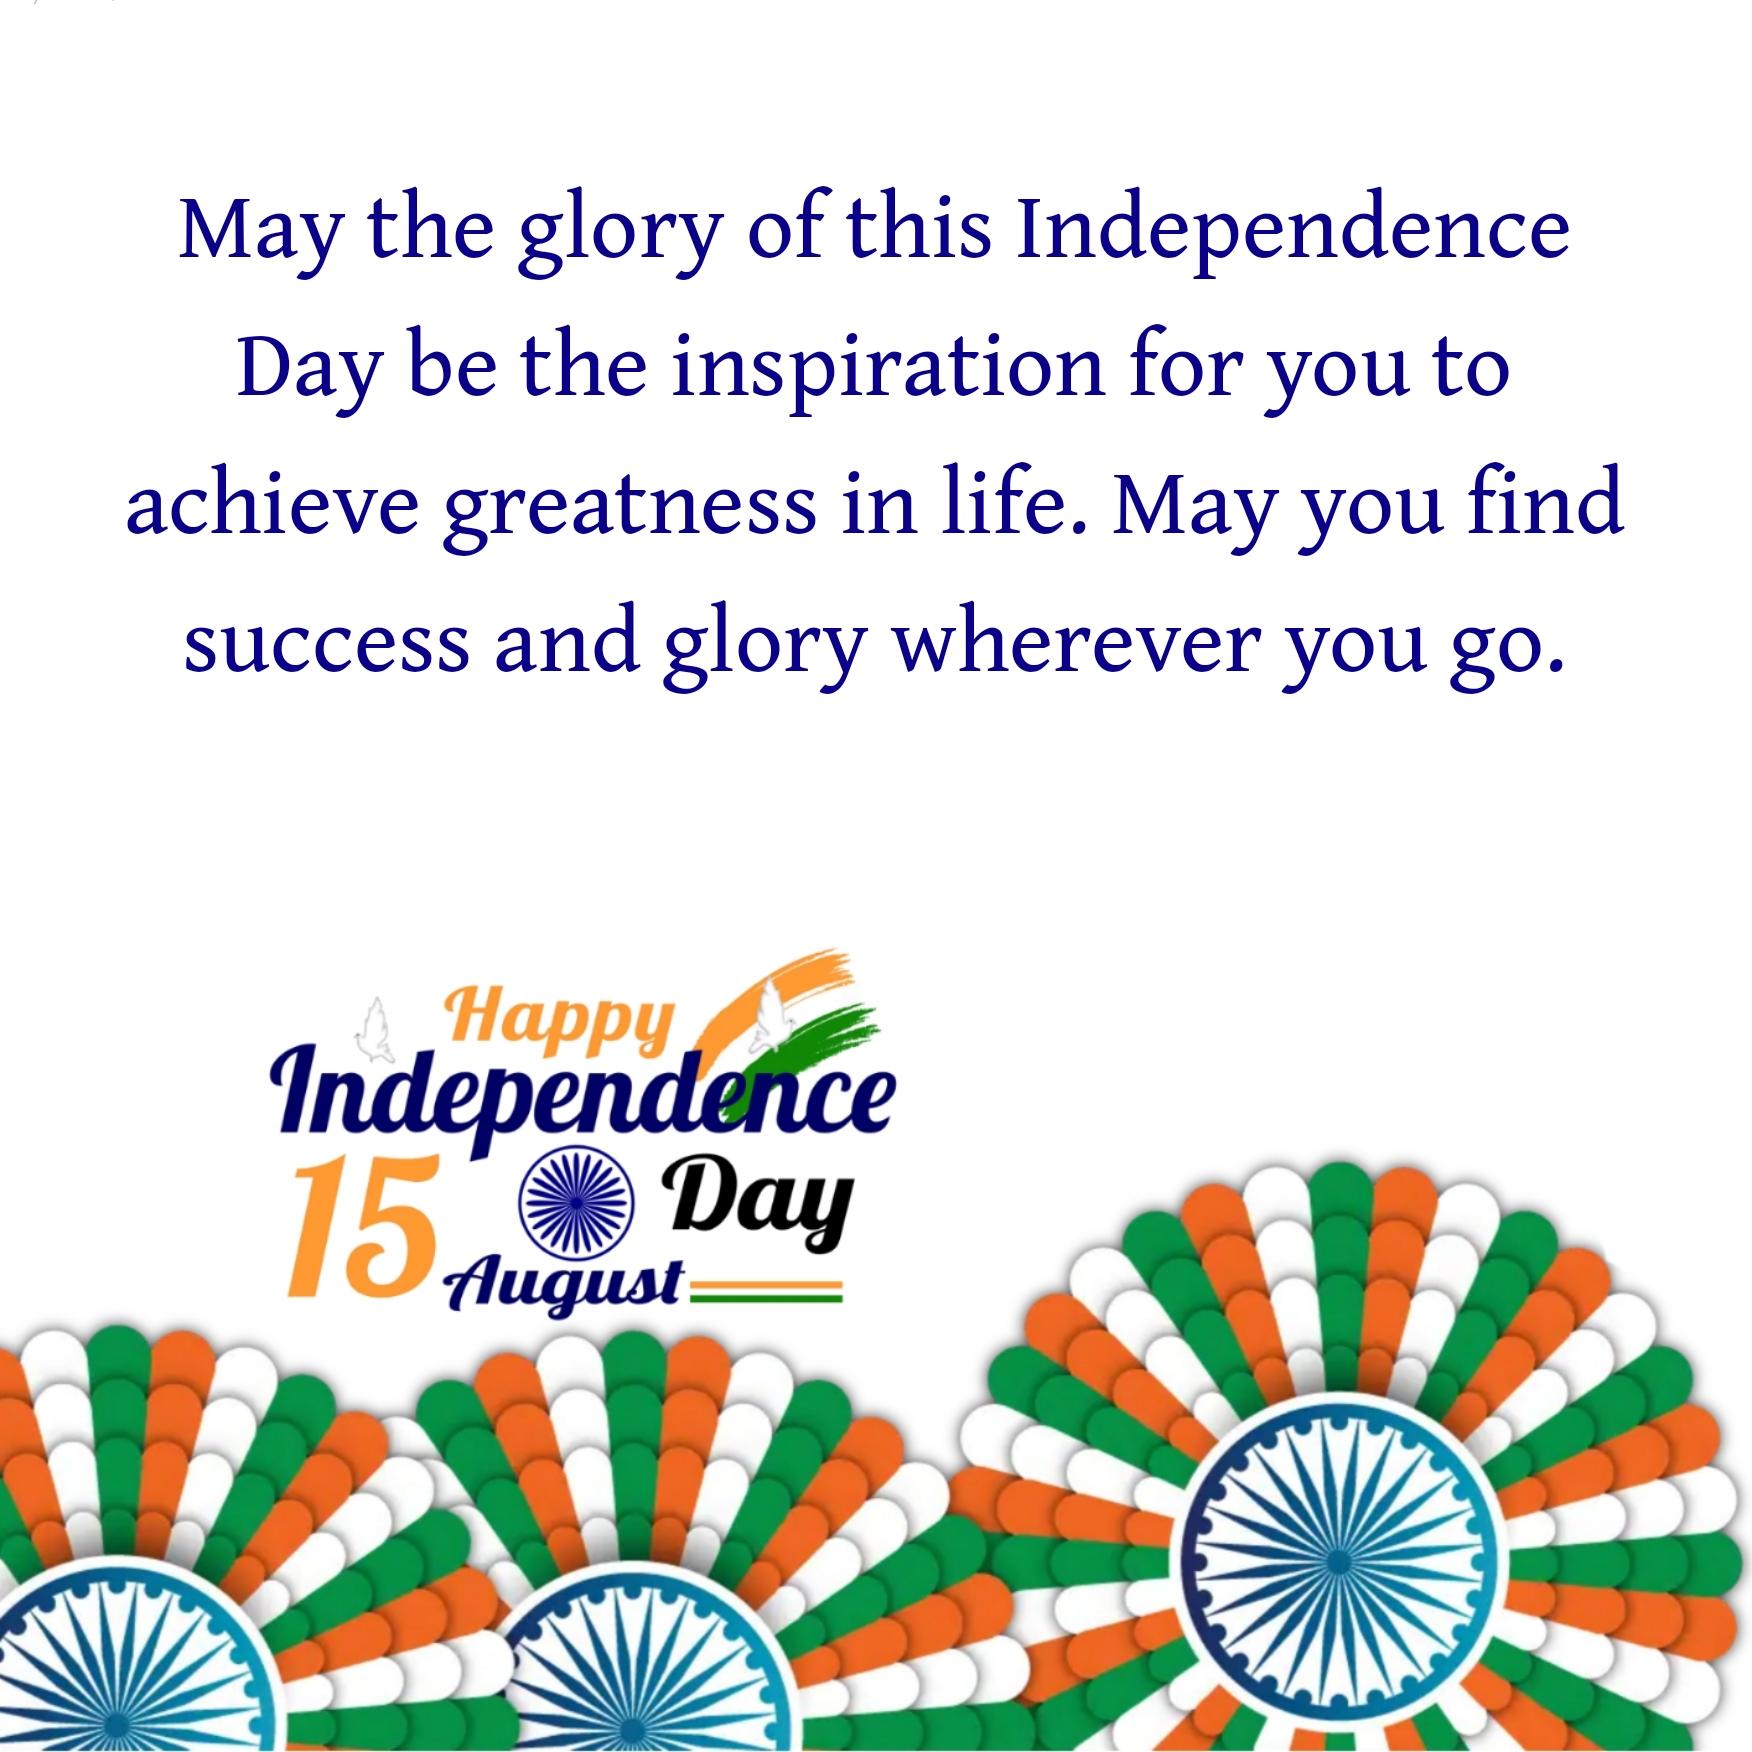 May the glory of this Independence Day be the inspiration